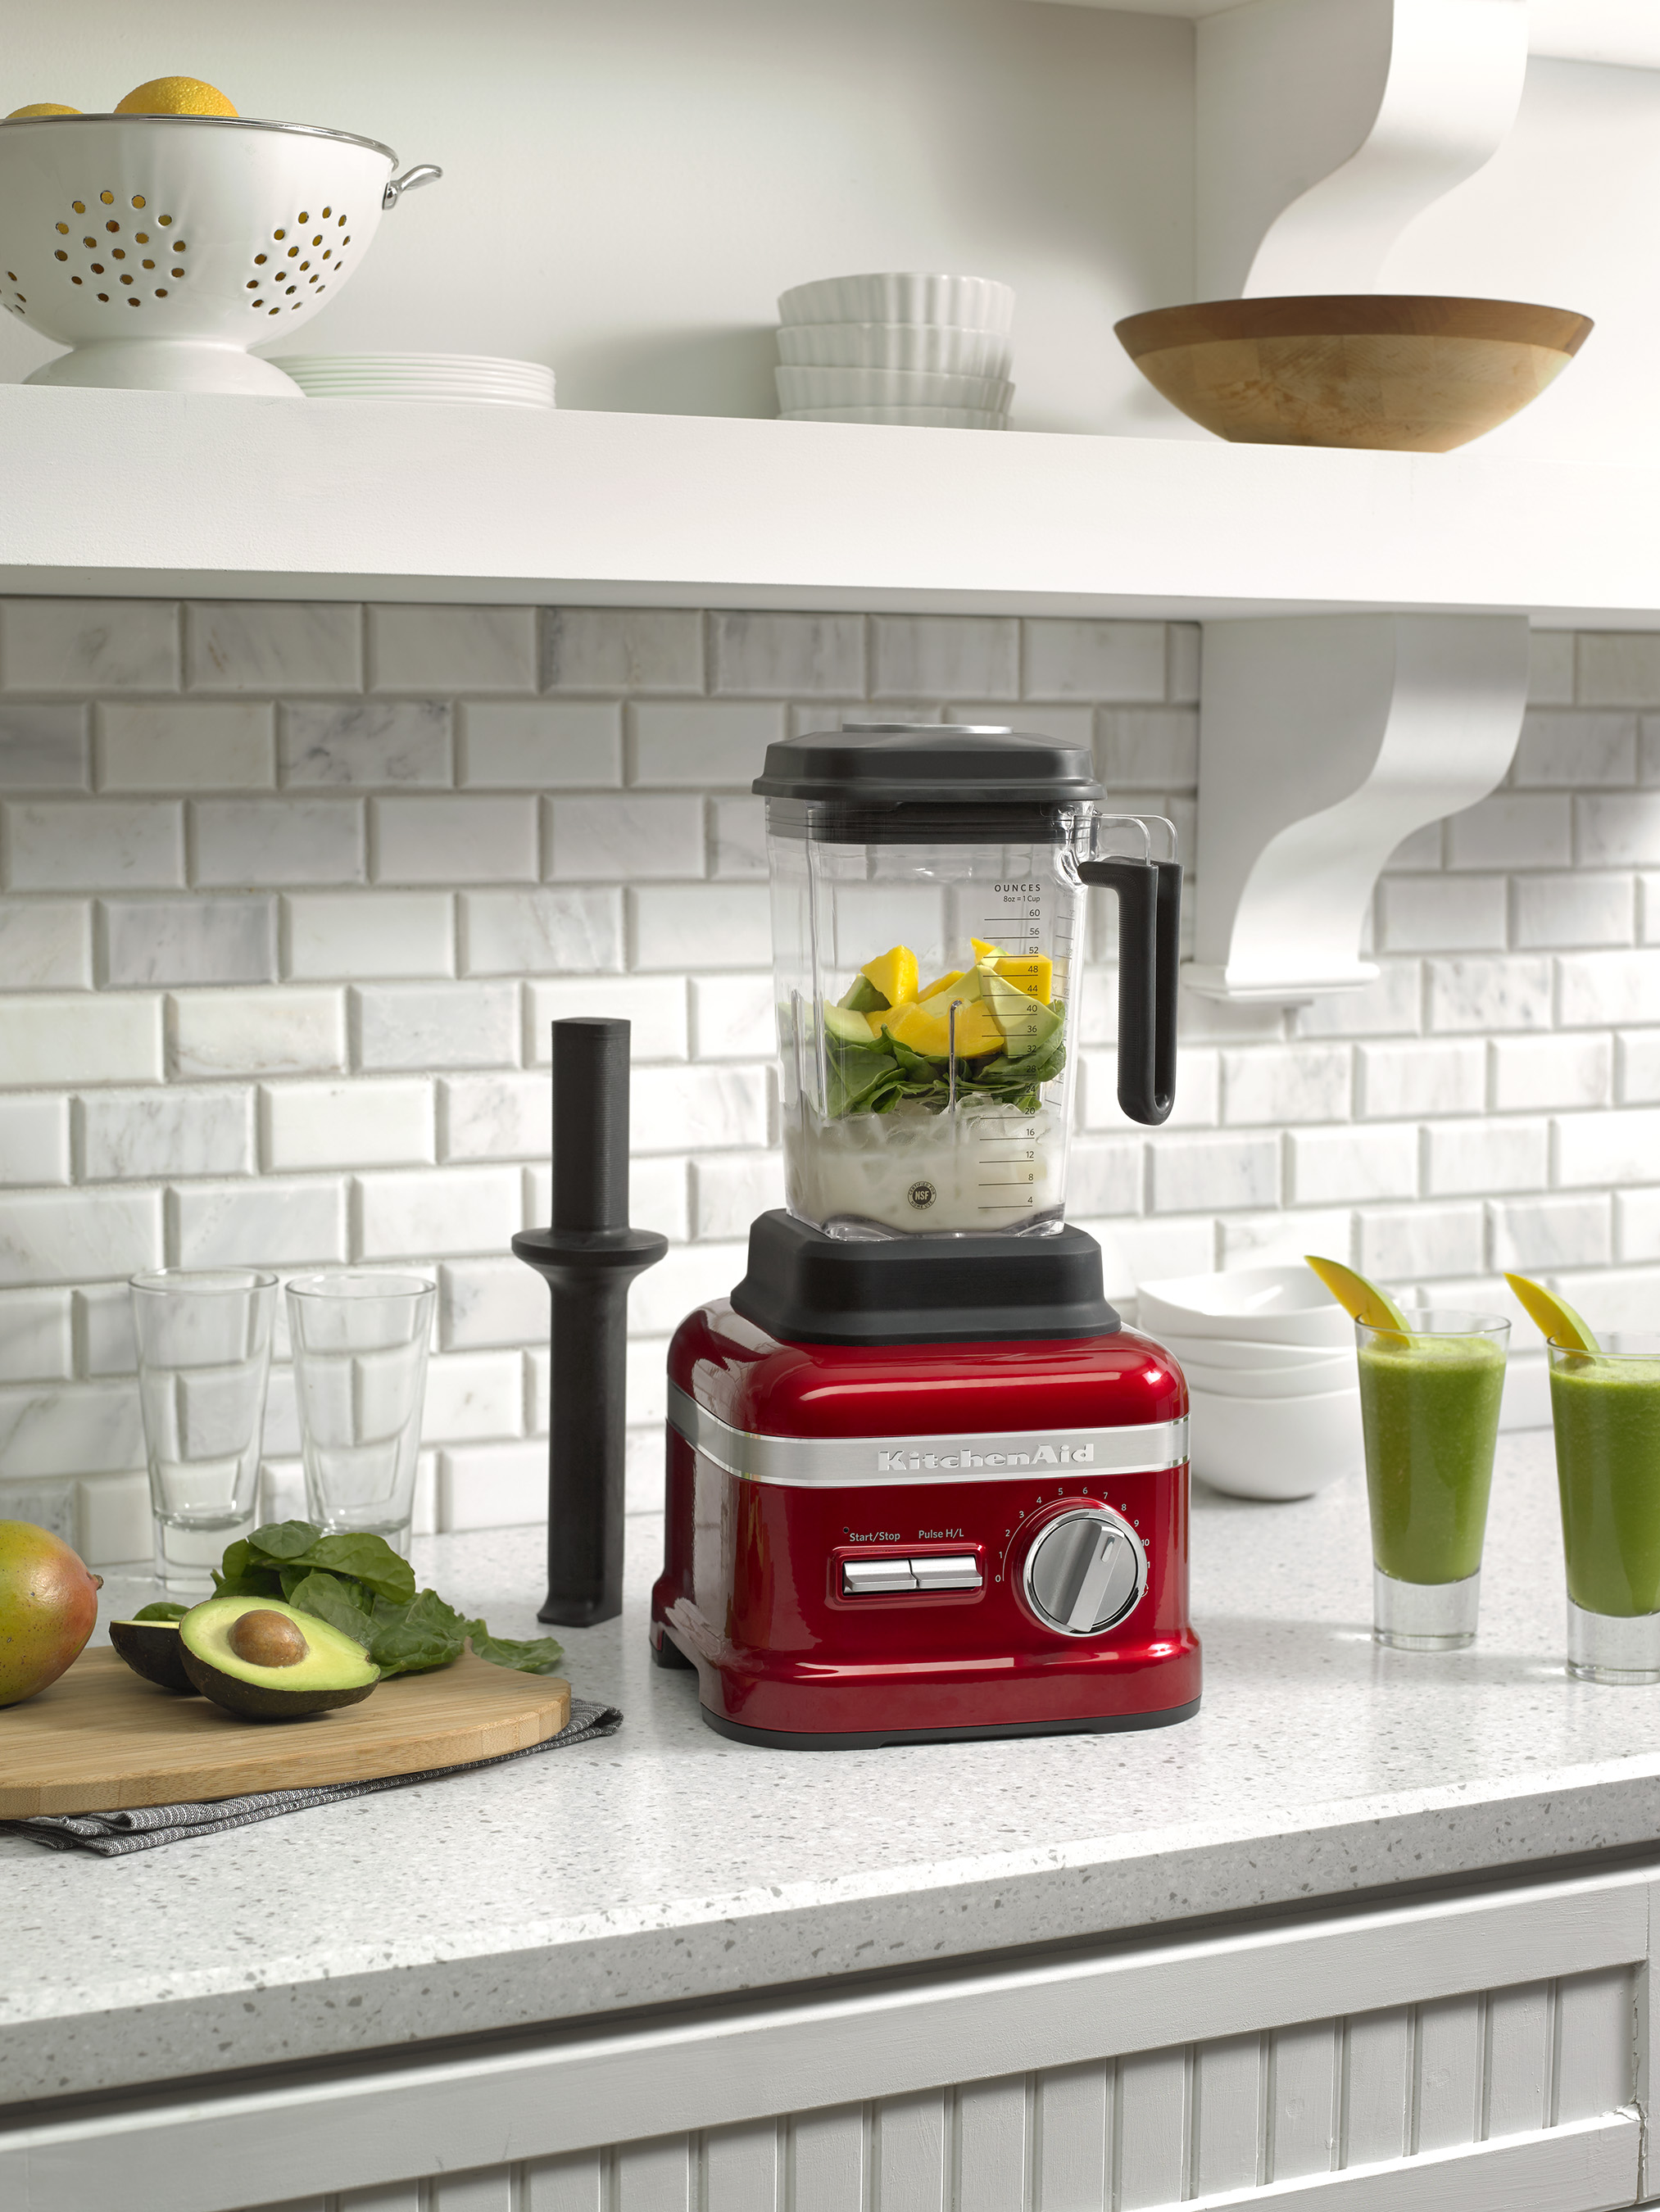 Both Pro Line® Series Blender models feature a 3.5 Peak HP motor, a self-cleaning cycle and a 10-year warranty.